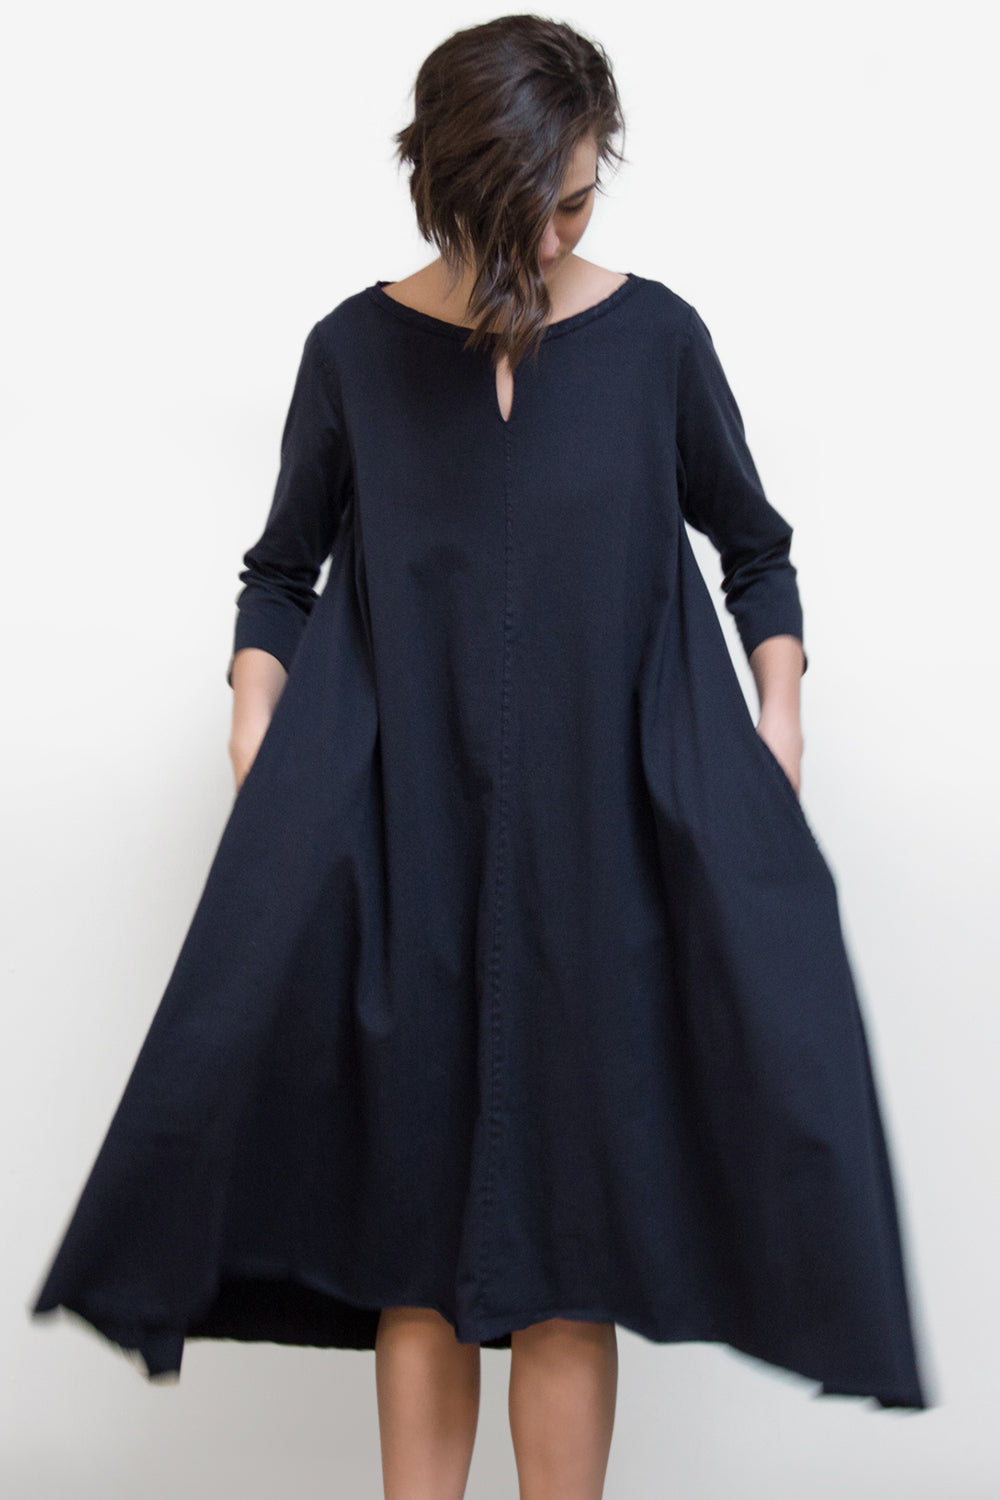 The School of Making keyhole A-line dress in Navy Blue.